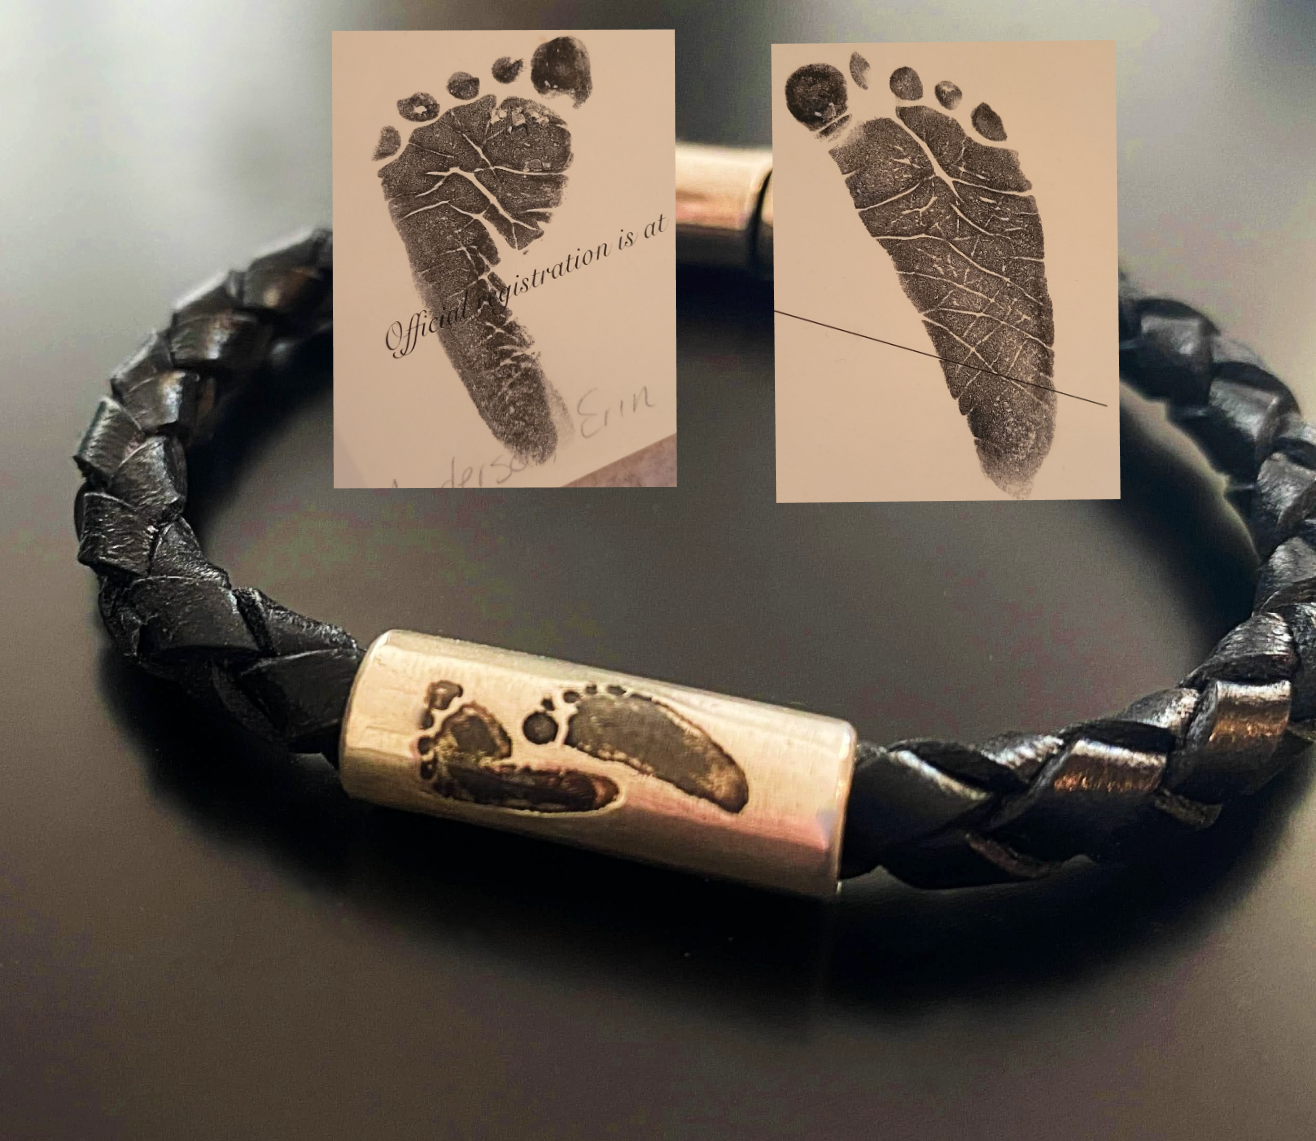 babies footprint reproduced on sterling silver tube bead on leather bracelet